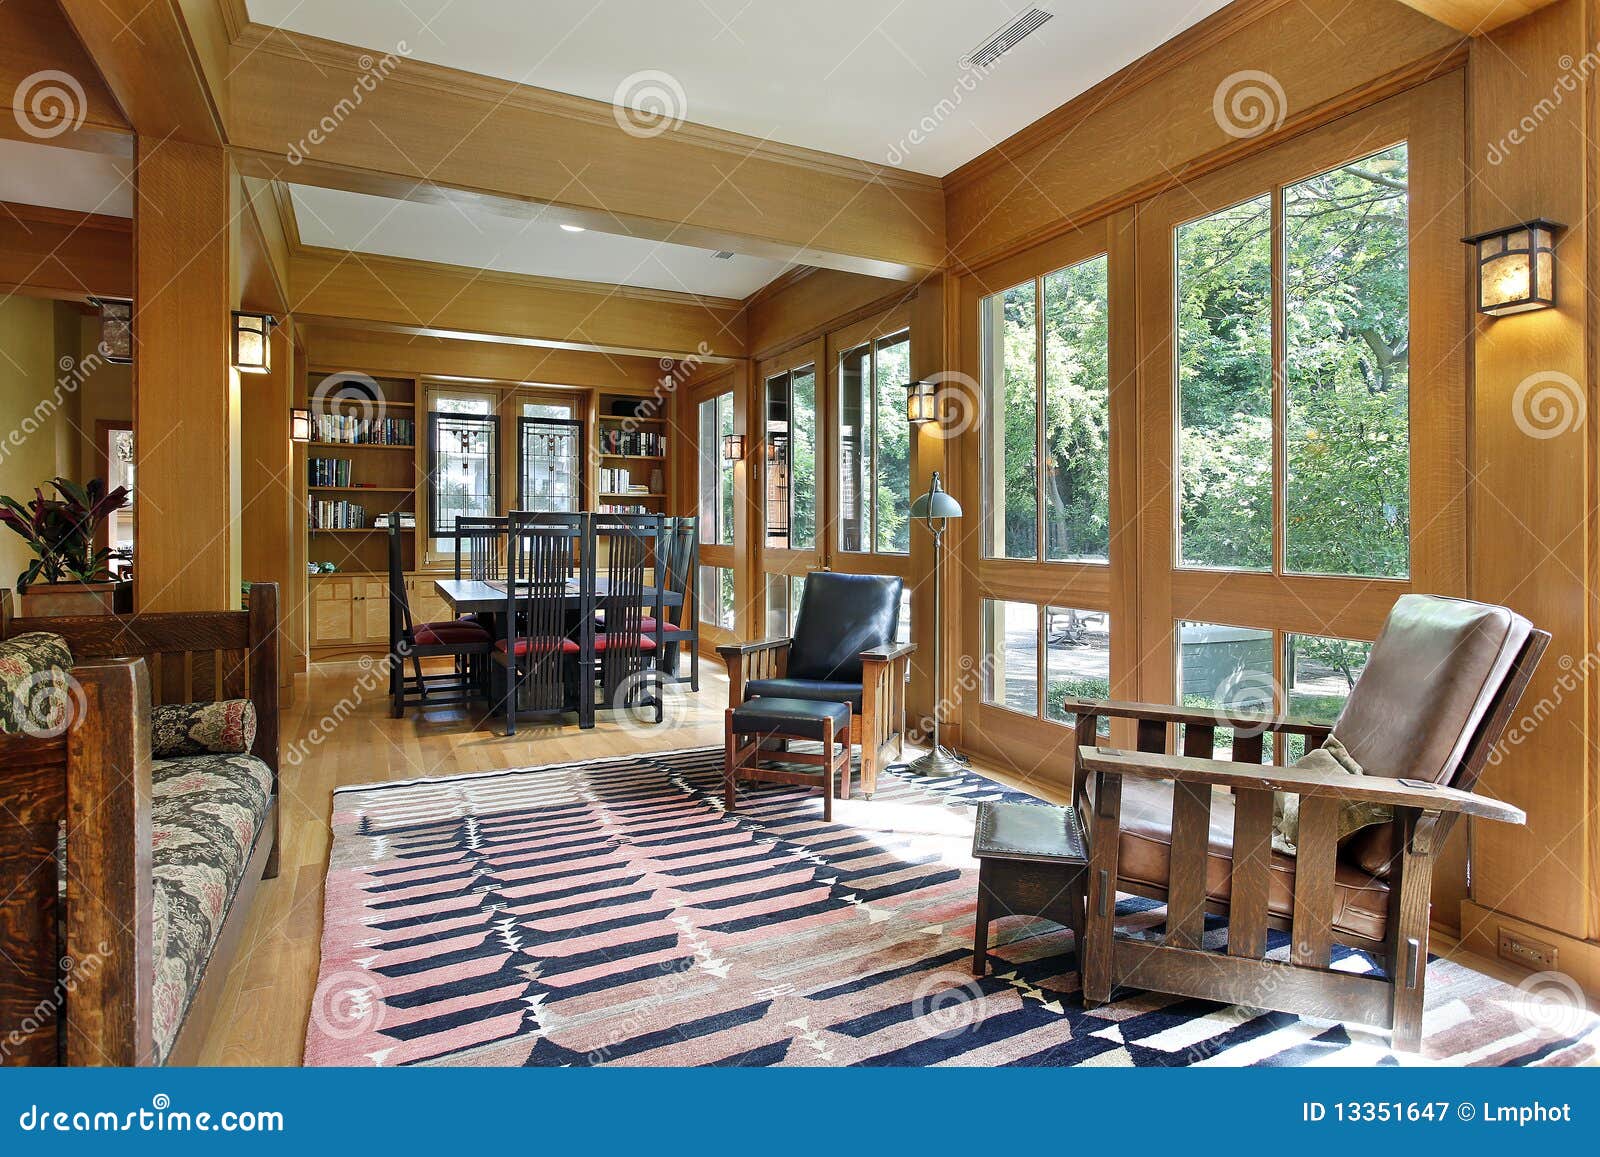 Dining Room With Wood Trim Royalty Free Stock Photography 